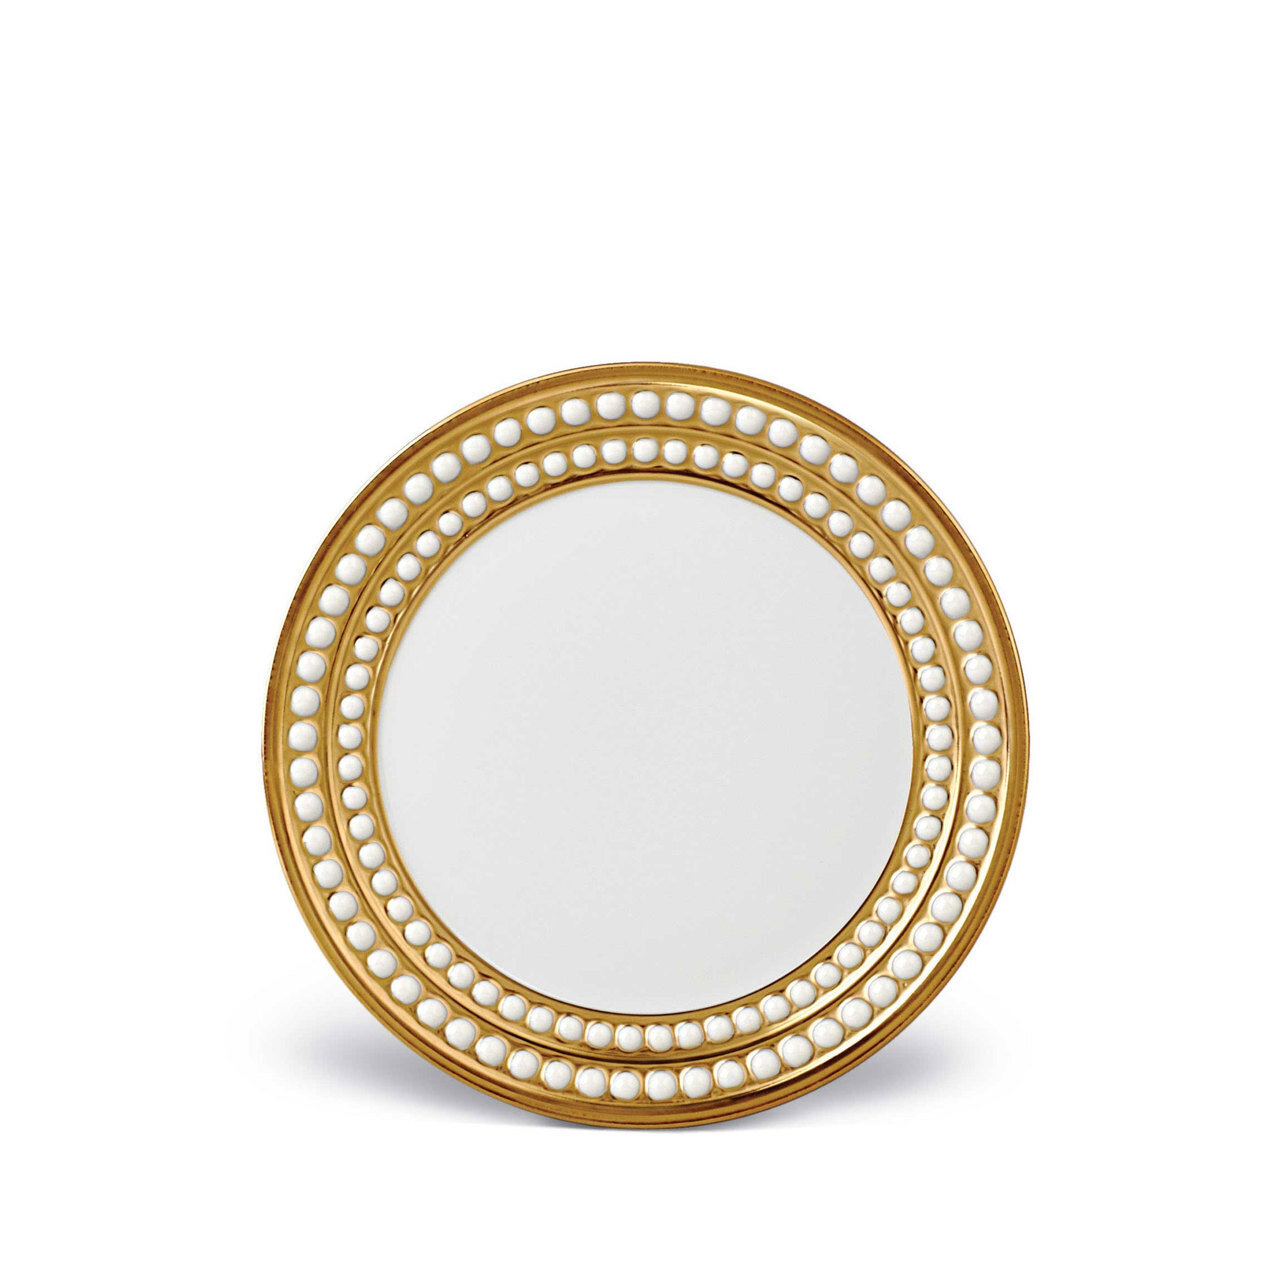 L'Objet Perlee Bread and Butter Plate Gold